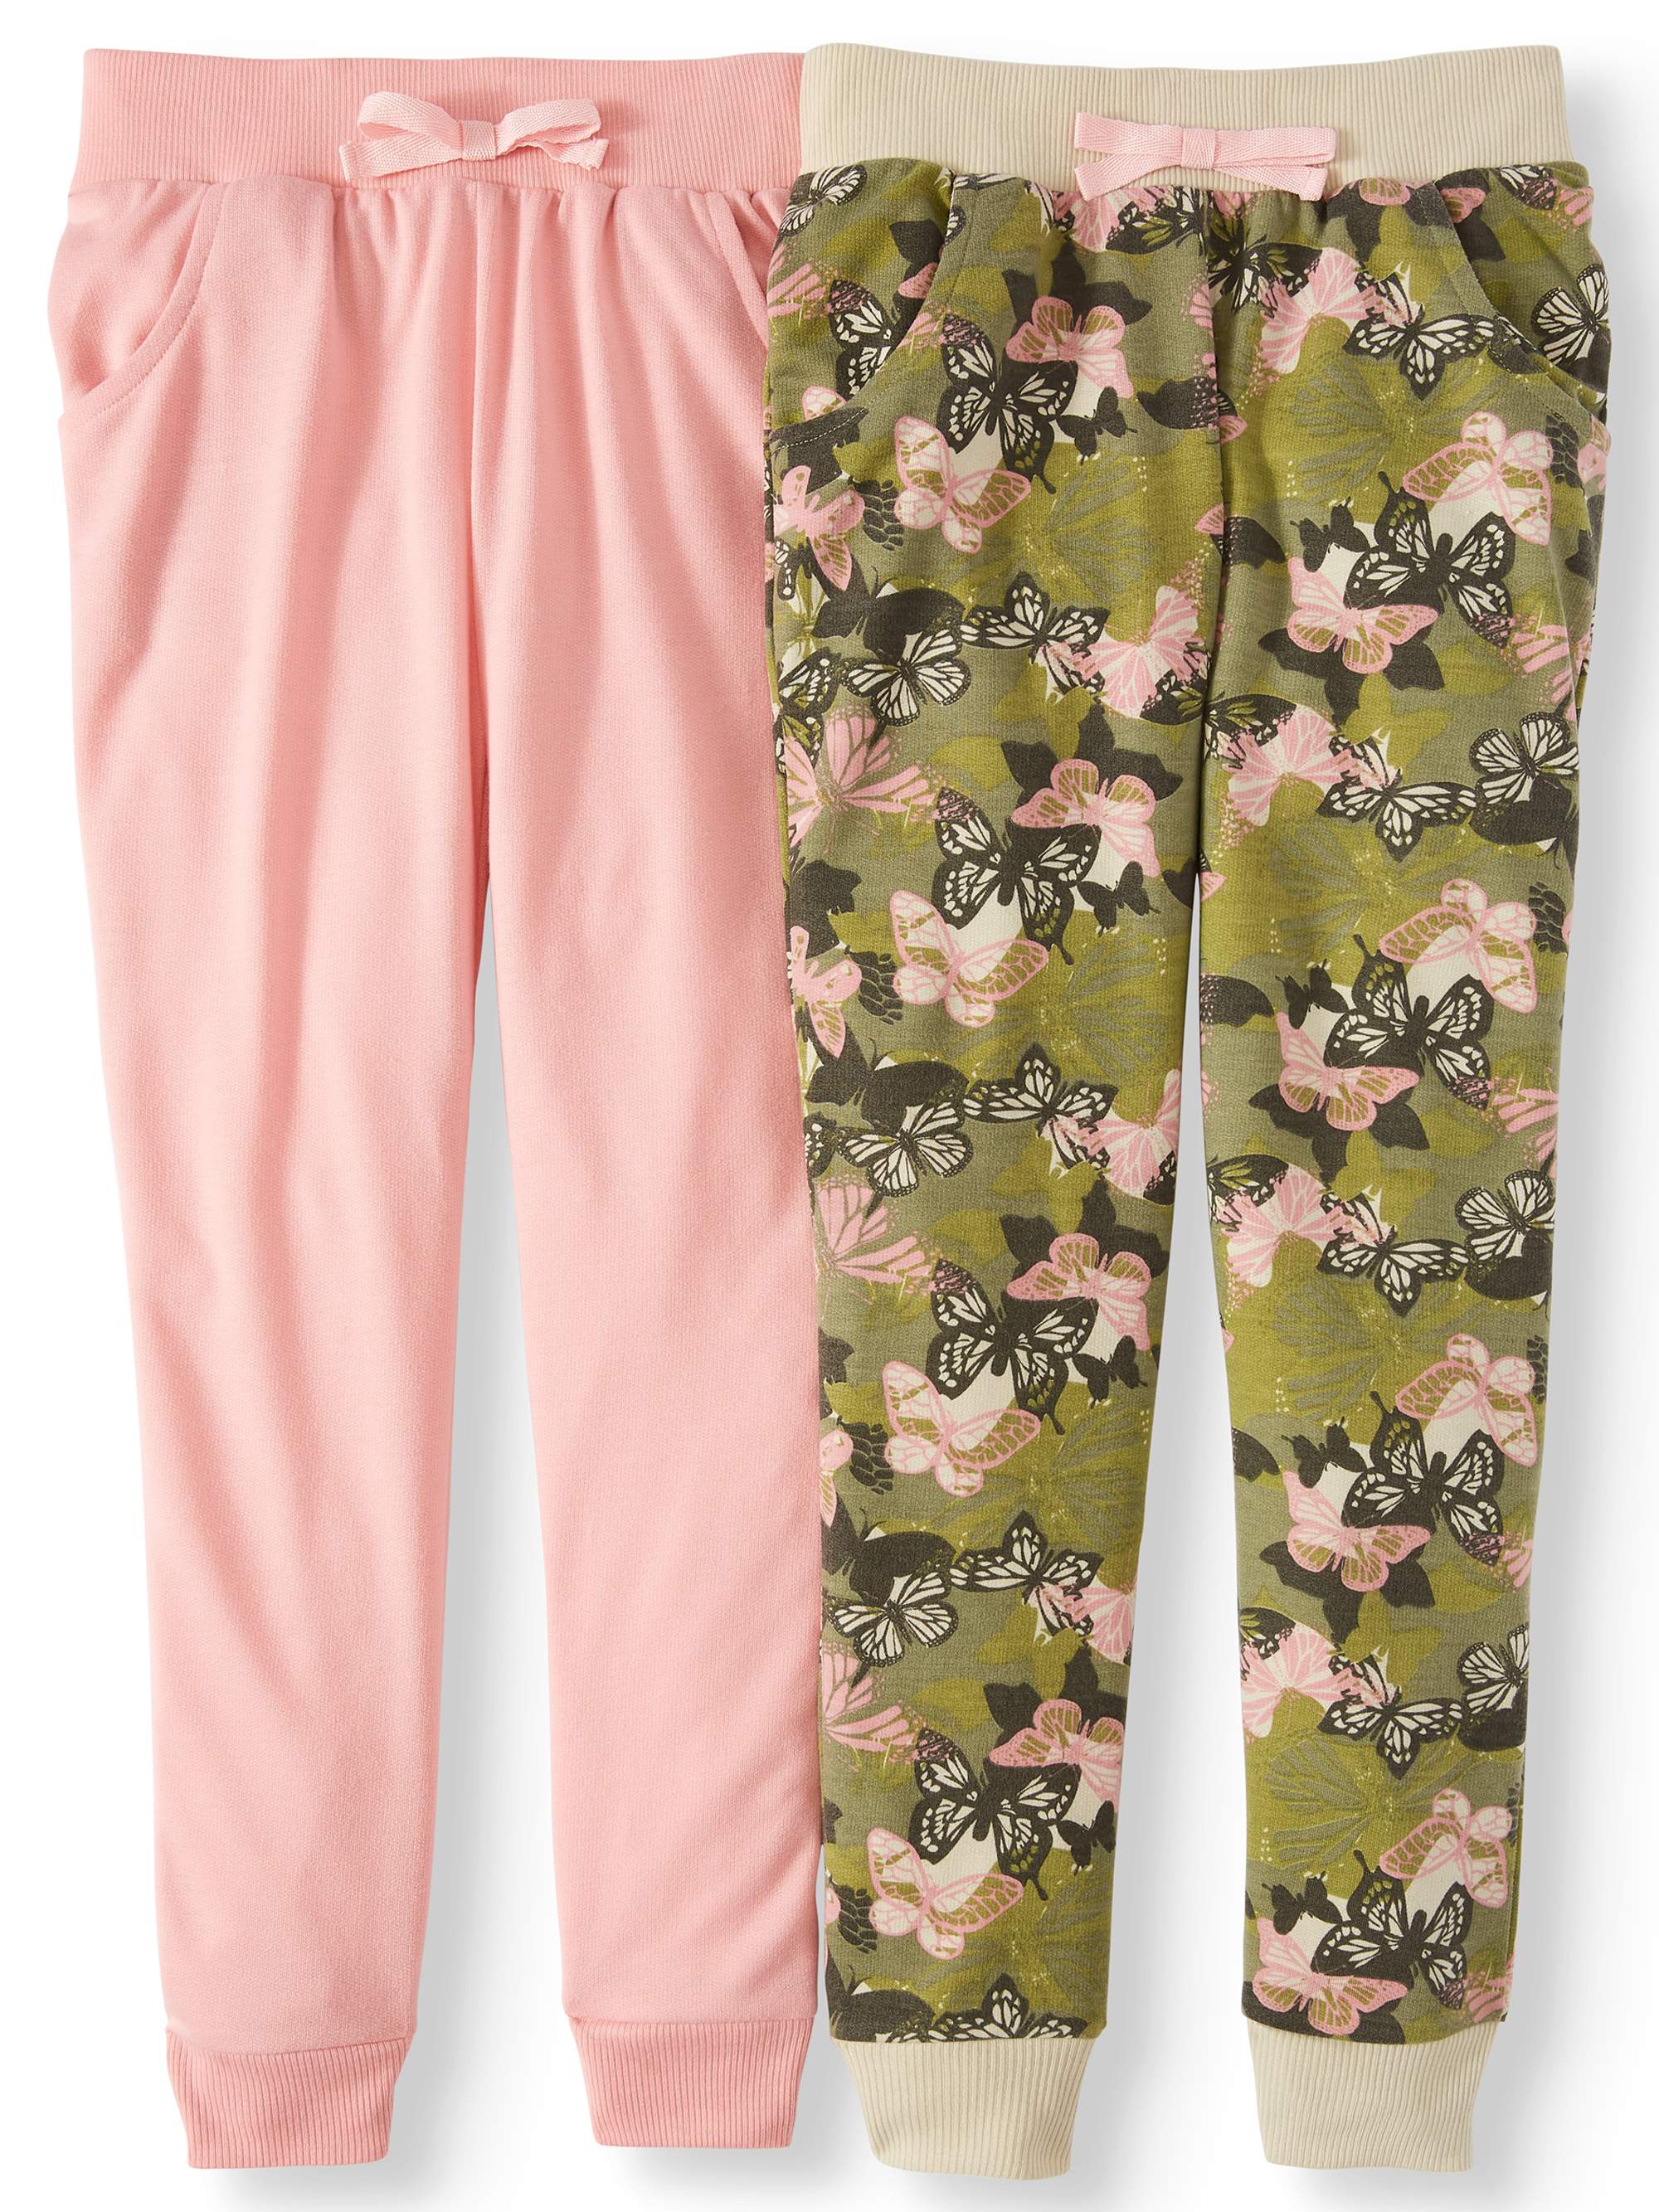 Pink Velvet Printed and Solid French Terry Joggers, 2-Pack (Little Girls & Big Girls) - image 1 of 3